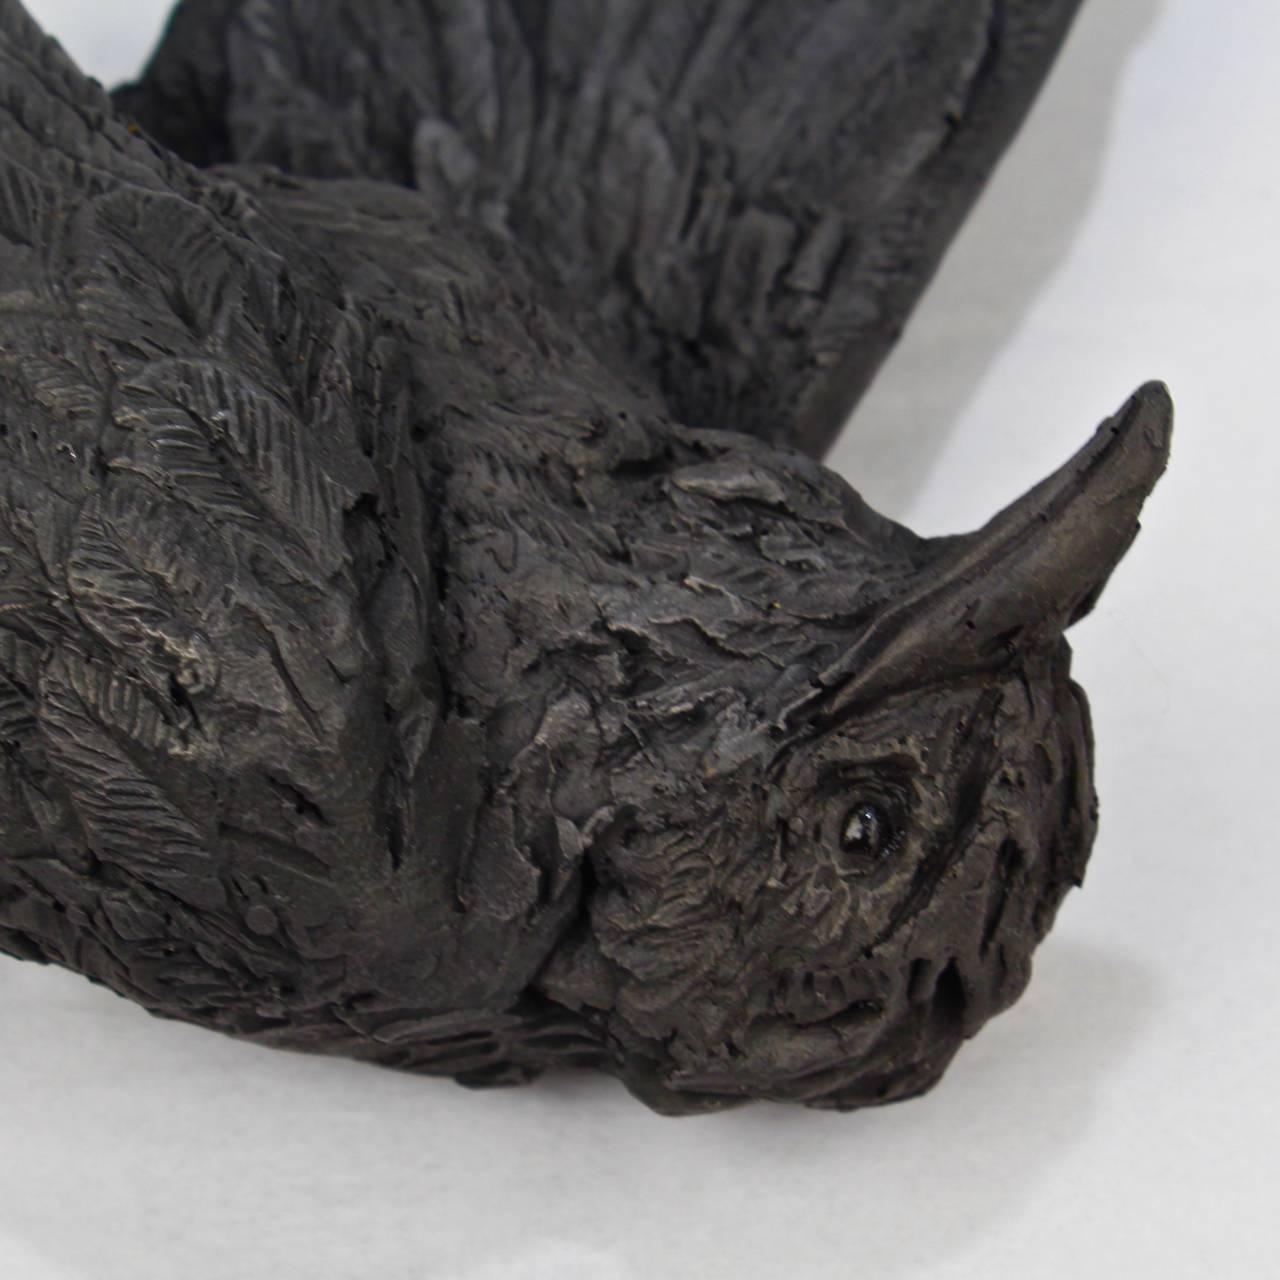 We All Fall Down II, Black Gesso Resin Sculpture of a Bird by Darla Jackson 2